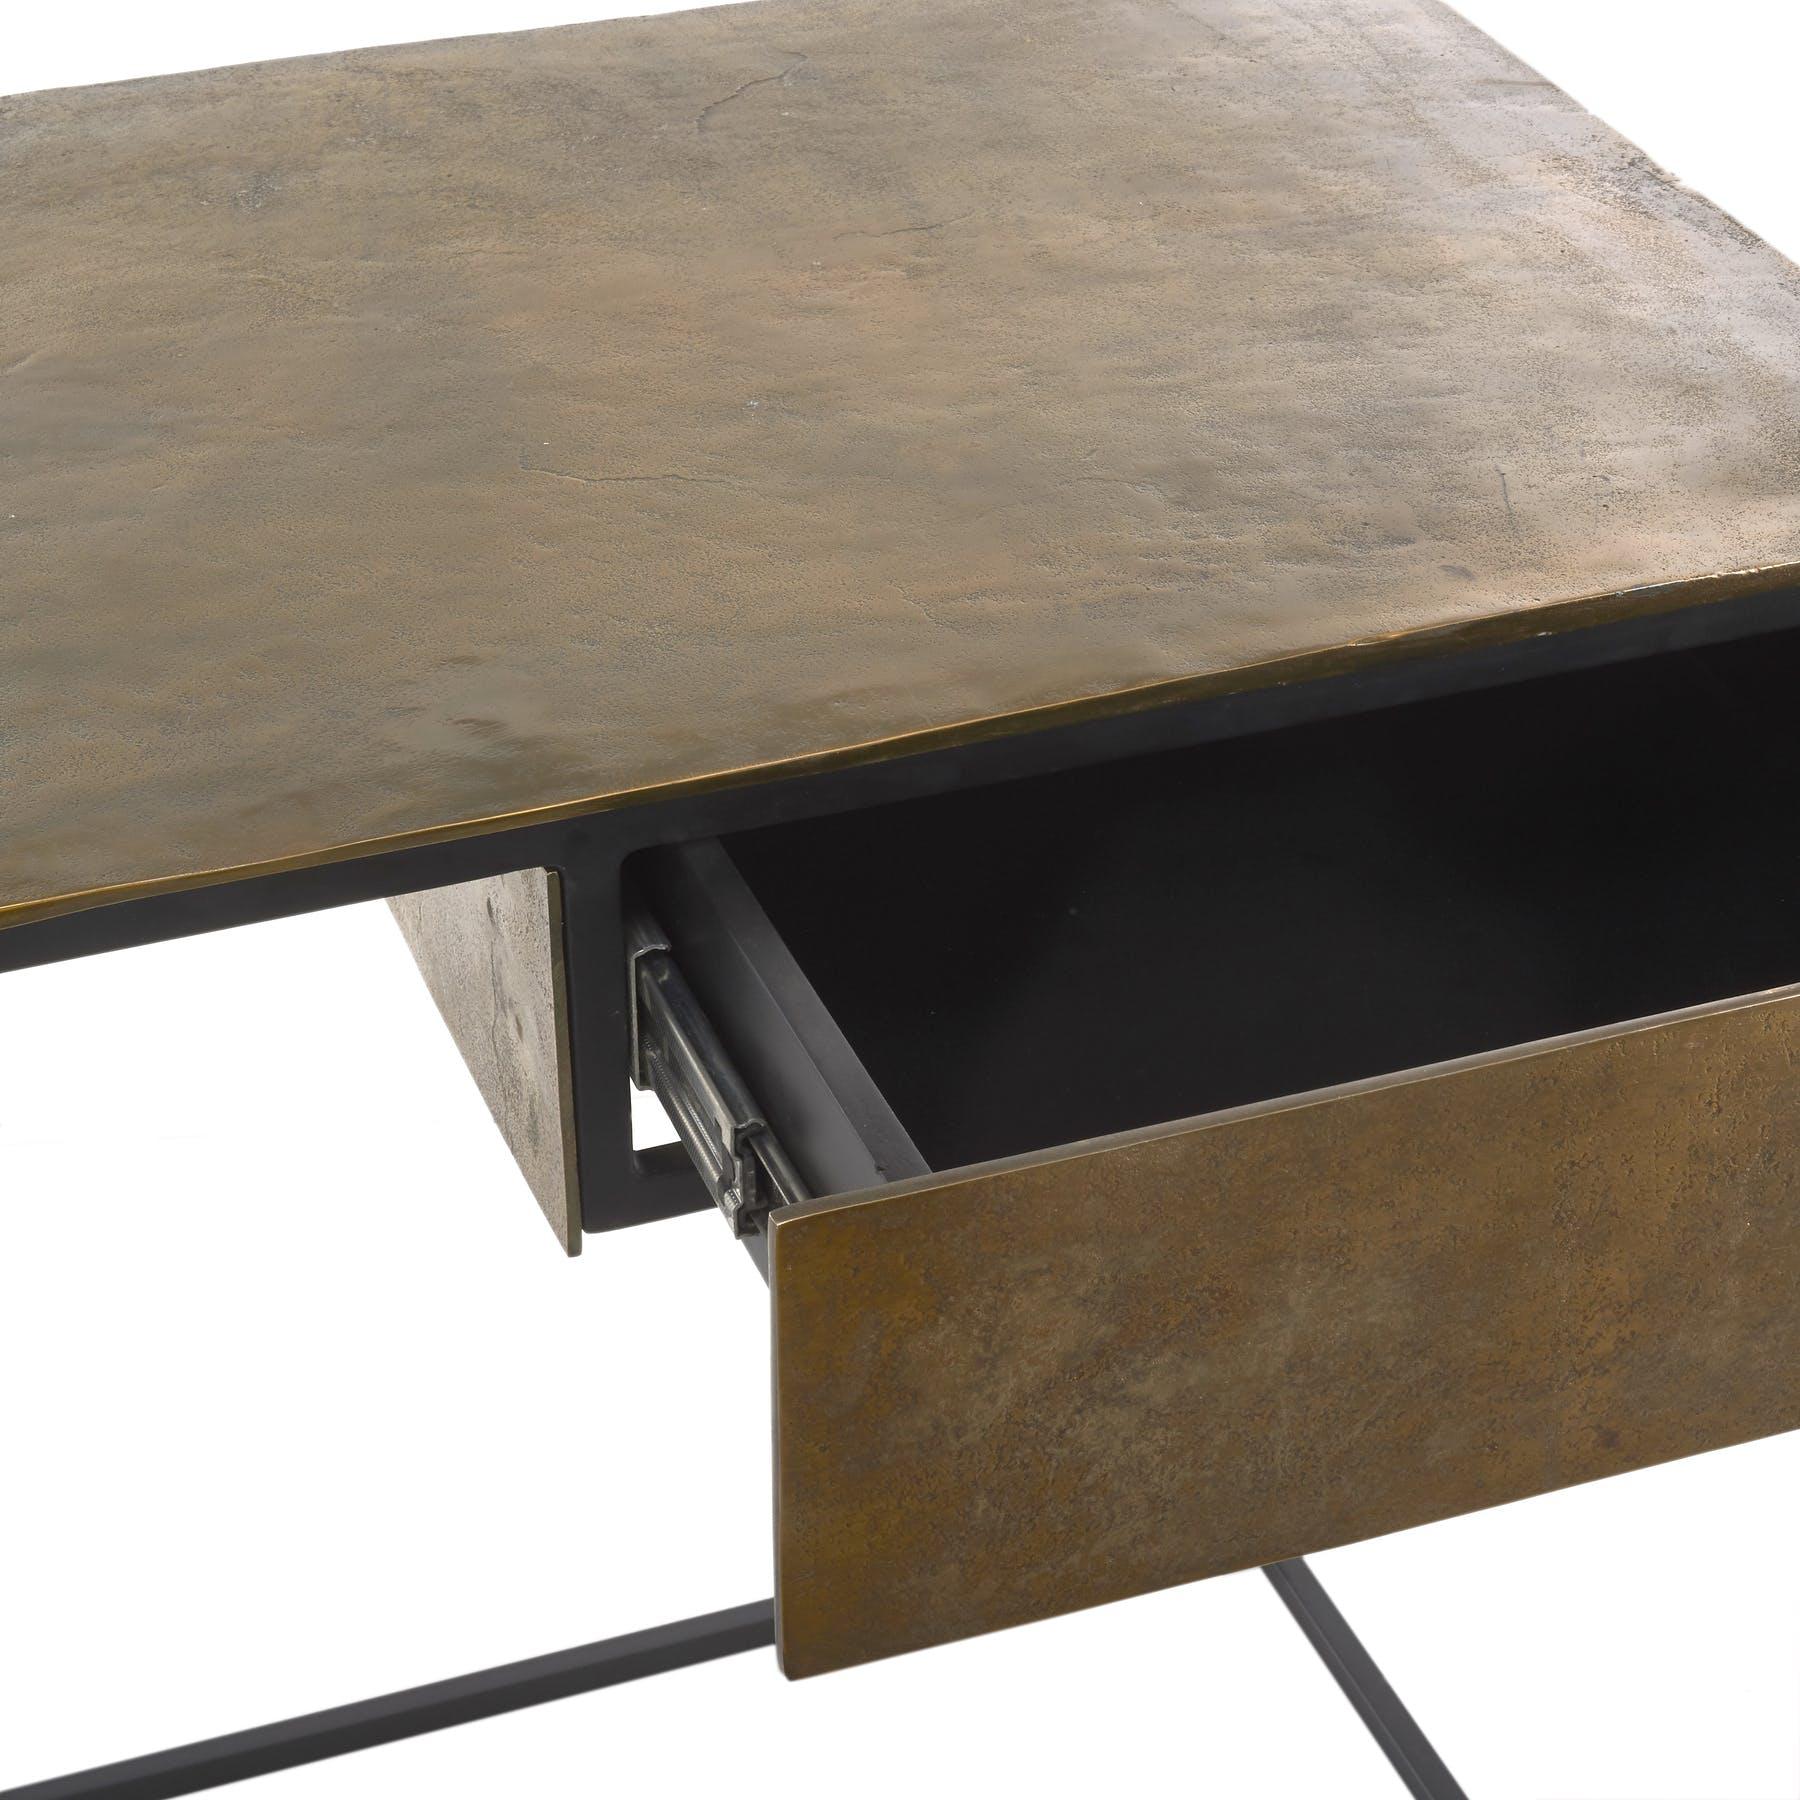 Antique brass-plated desk, Pols Potten Studio.
Dimensions: W 120.5 x D 51 x H 75.5 cm.
Materials: Black powder-coated iron frame, aluminum, antique brass-plated top.


Pols Potten products are characterized by a modern twist on Traditional